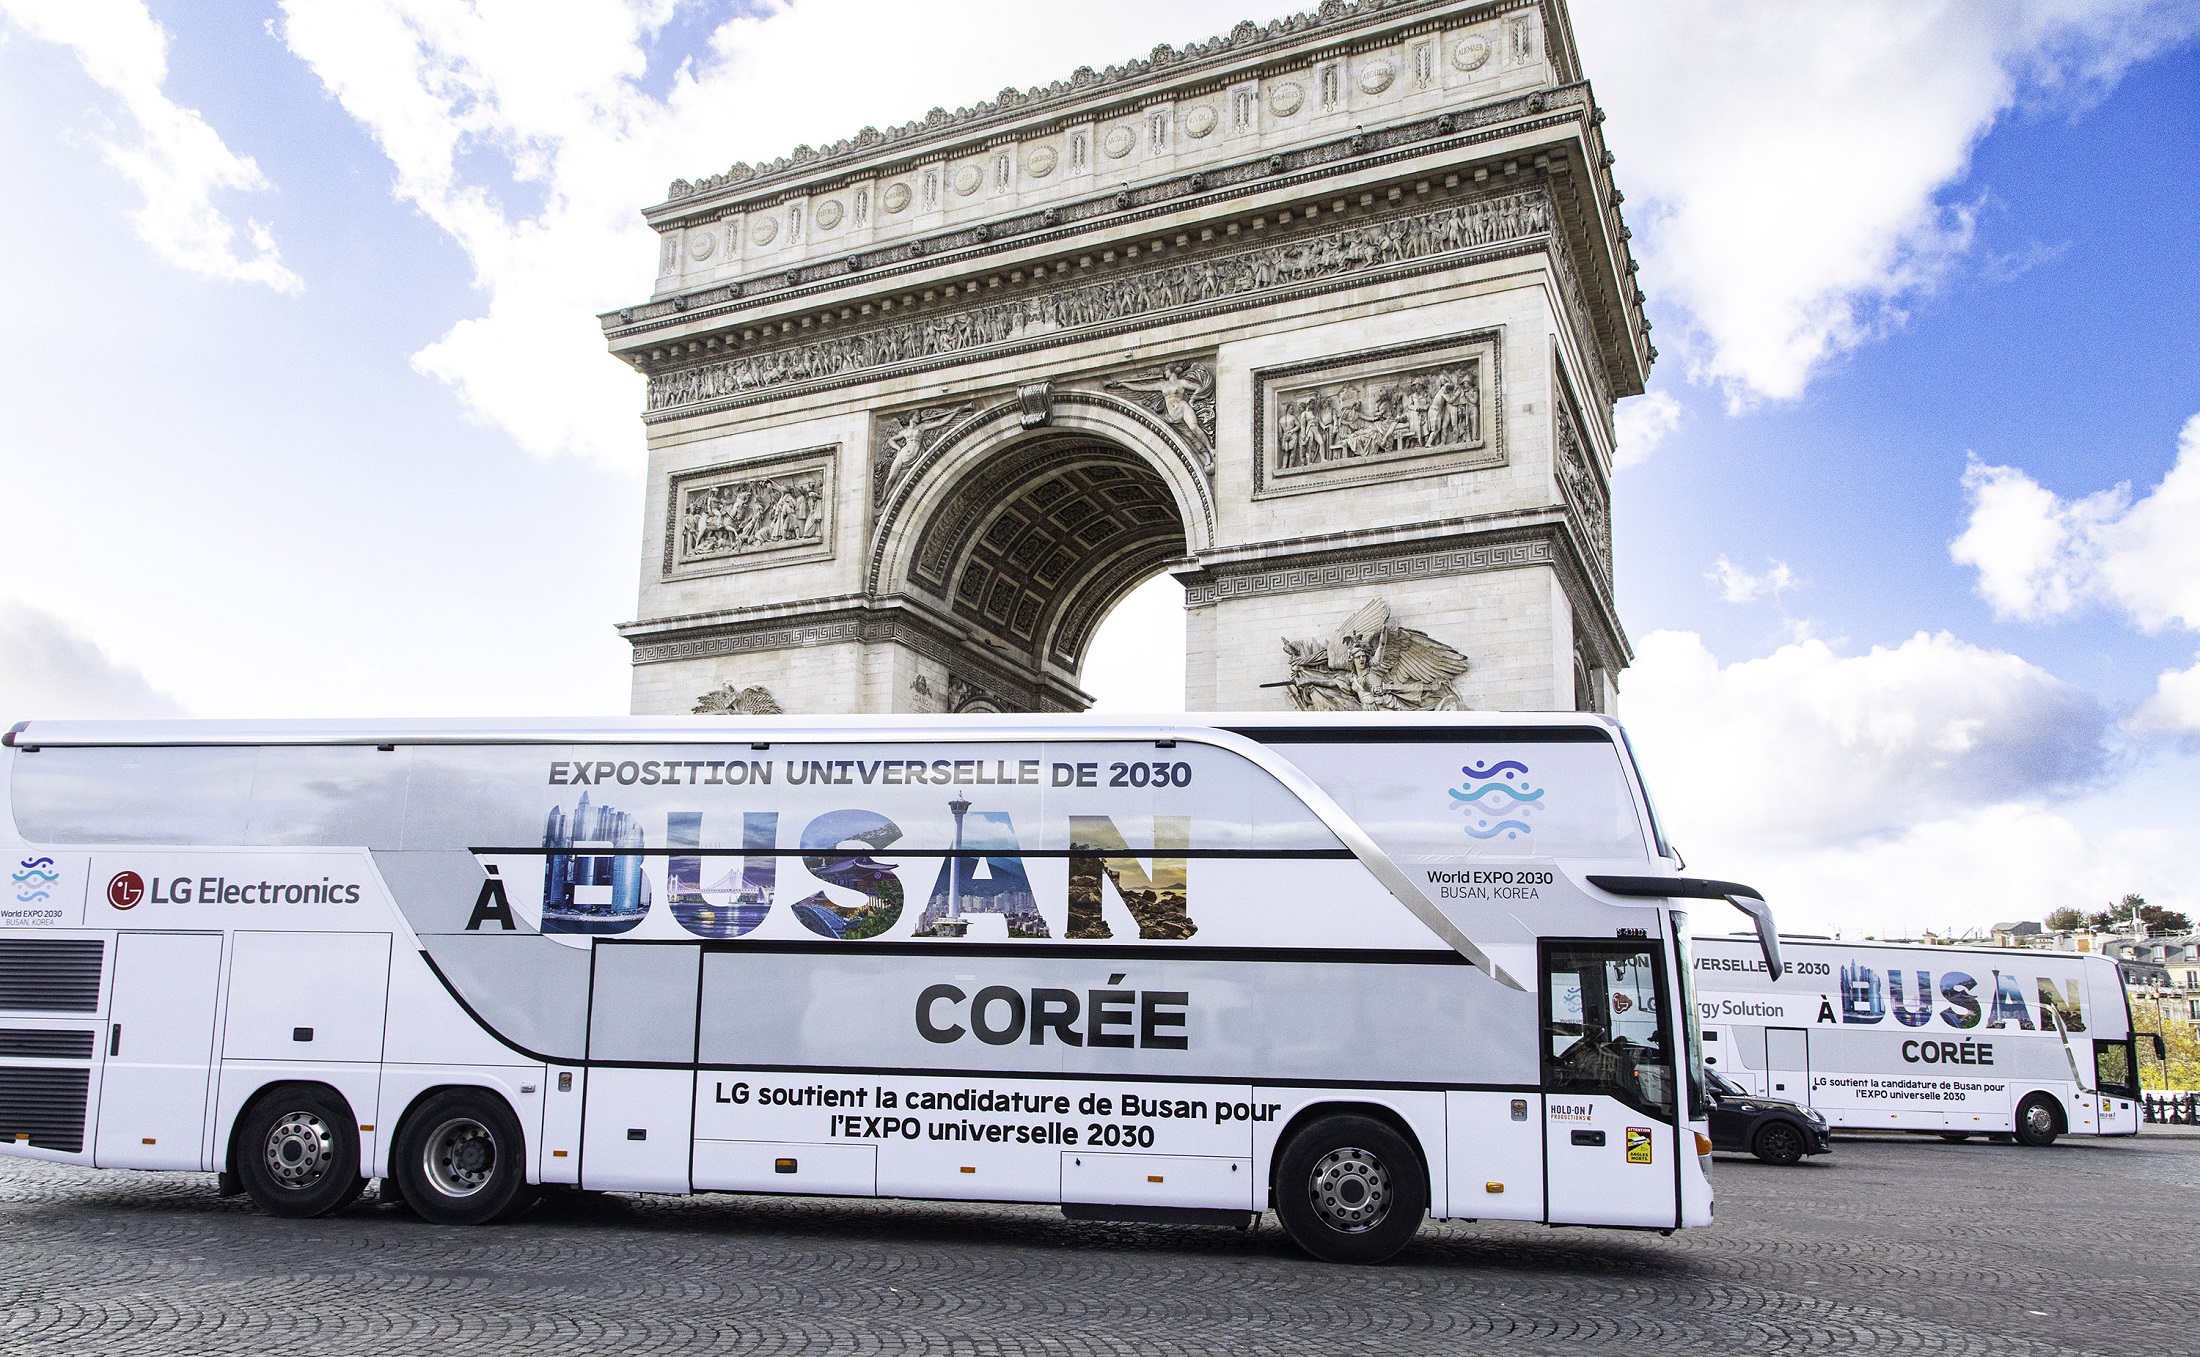 A photo of a big LG bus with the words 'A Busan Coree' passing by Arc de Triomphe